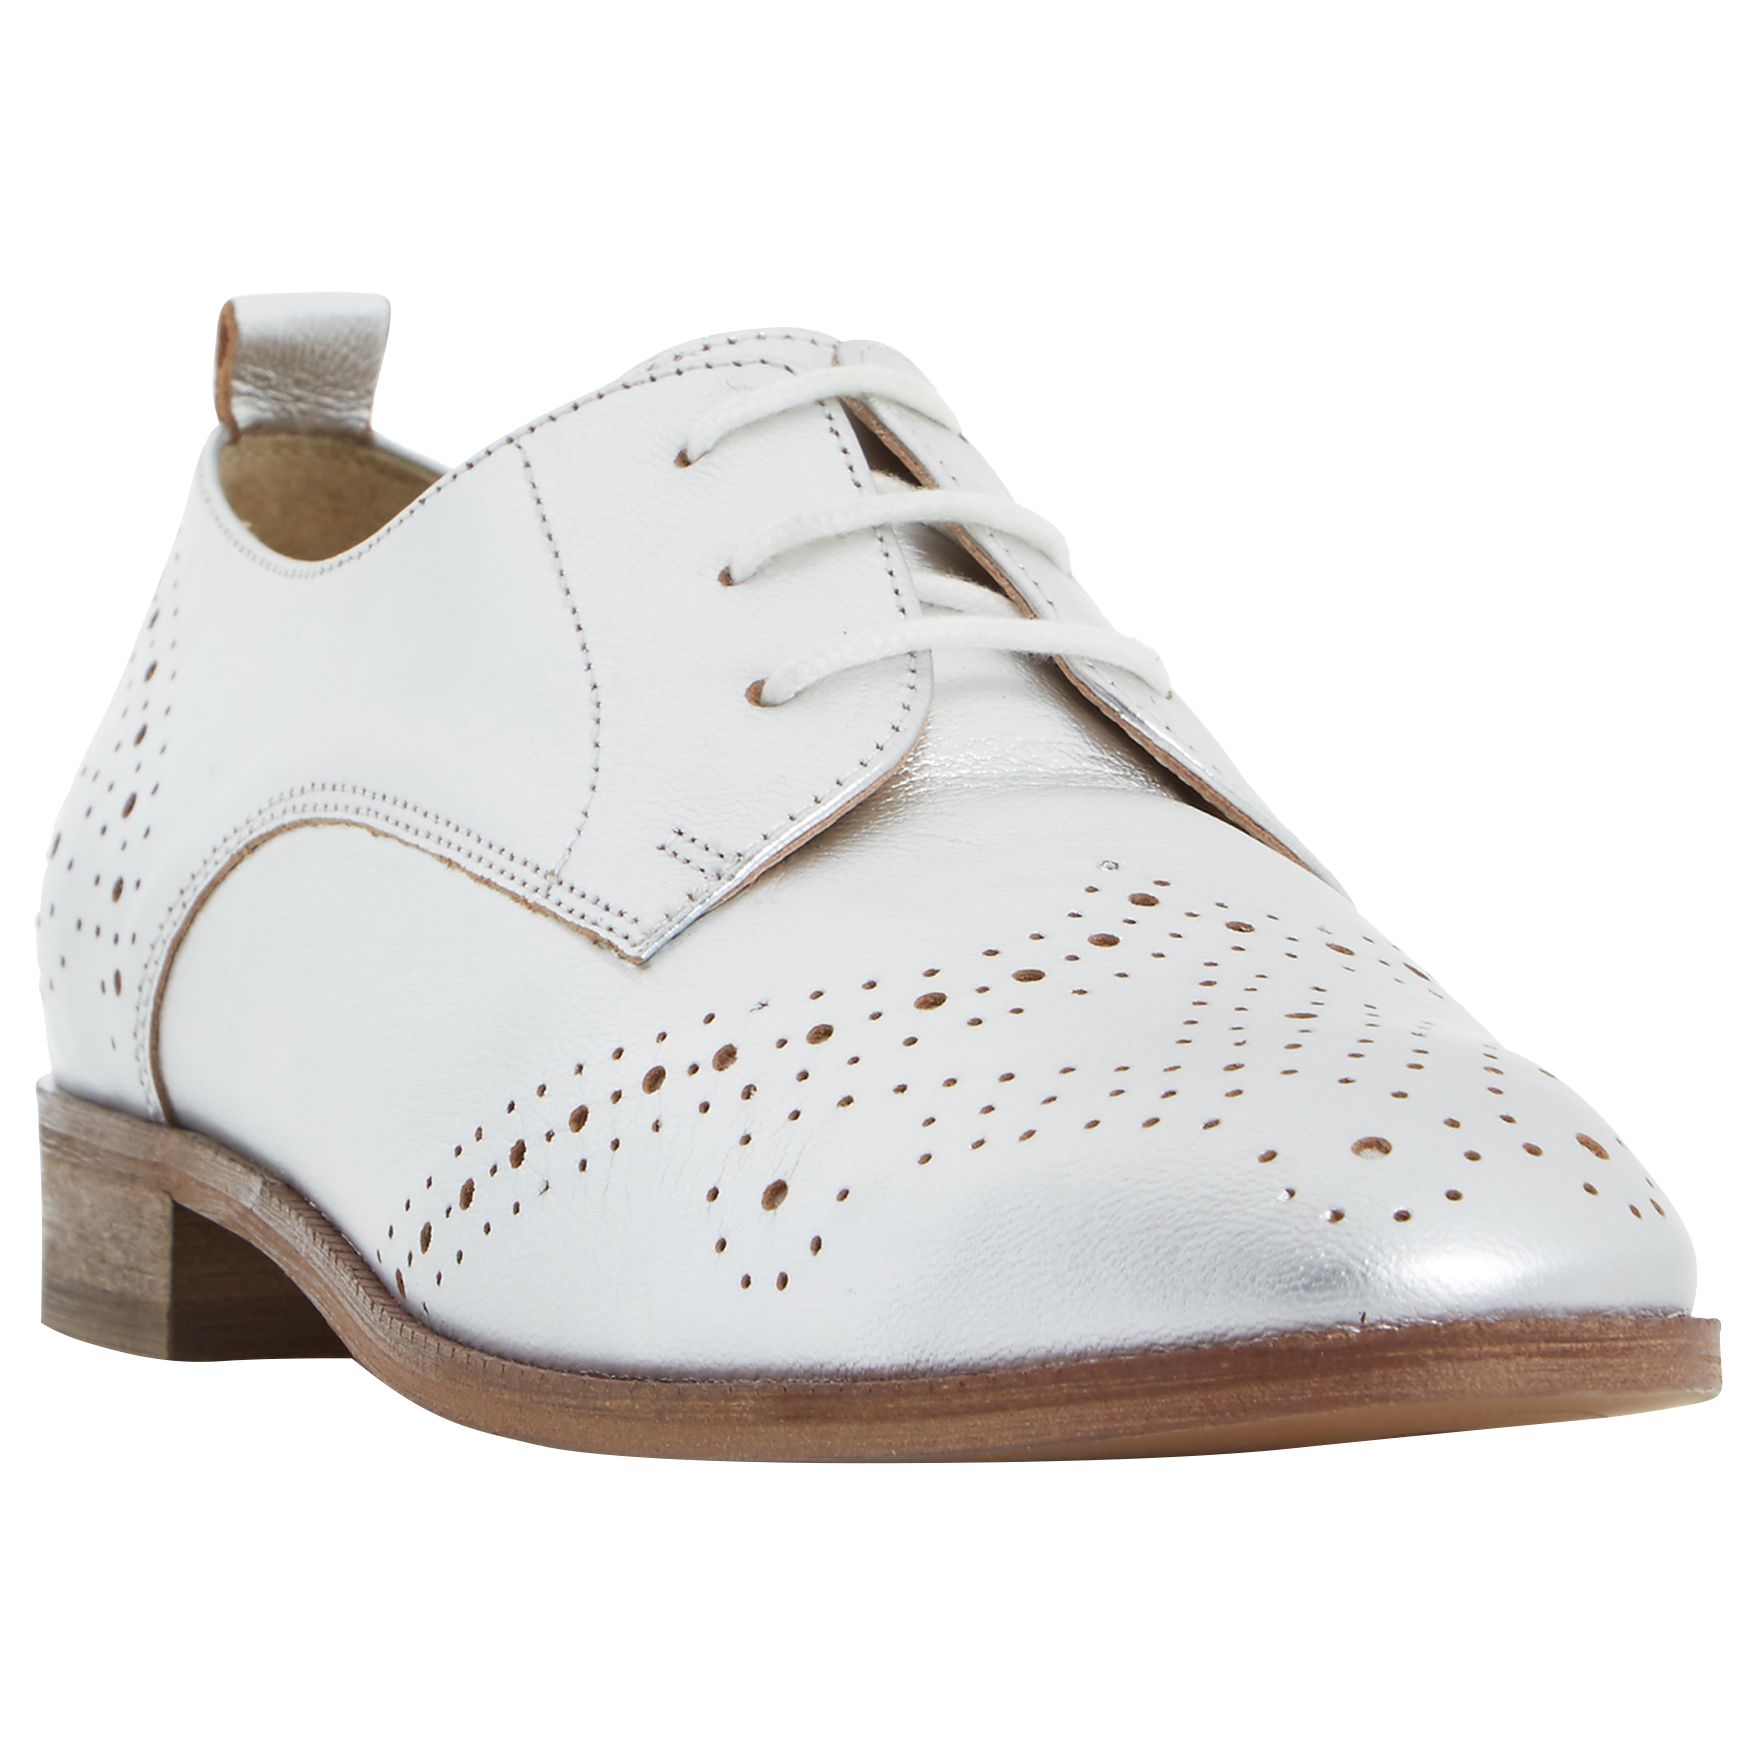 Dune Foster Lace Up Leather Brogues, Silver, 3